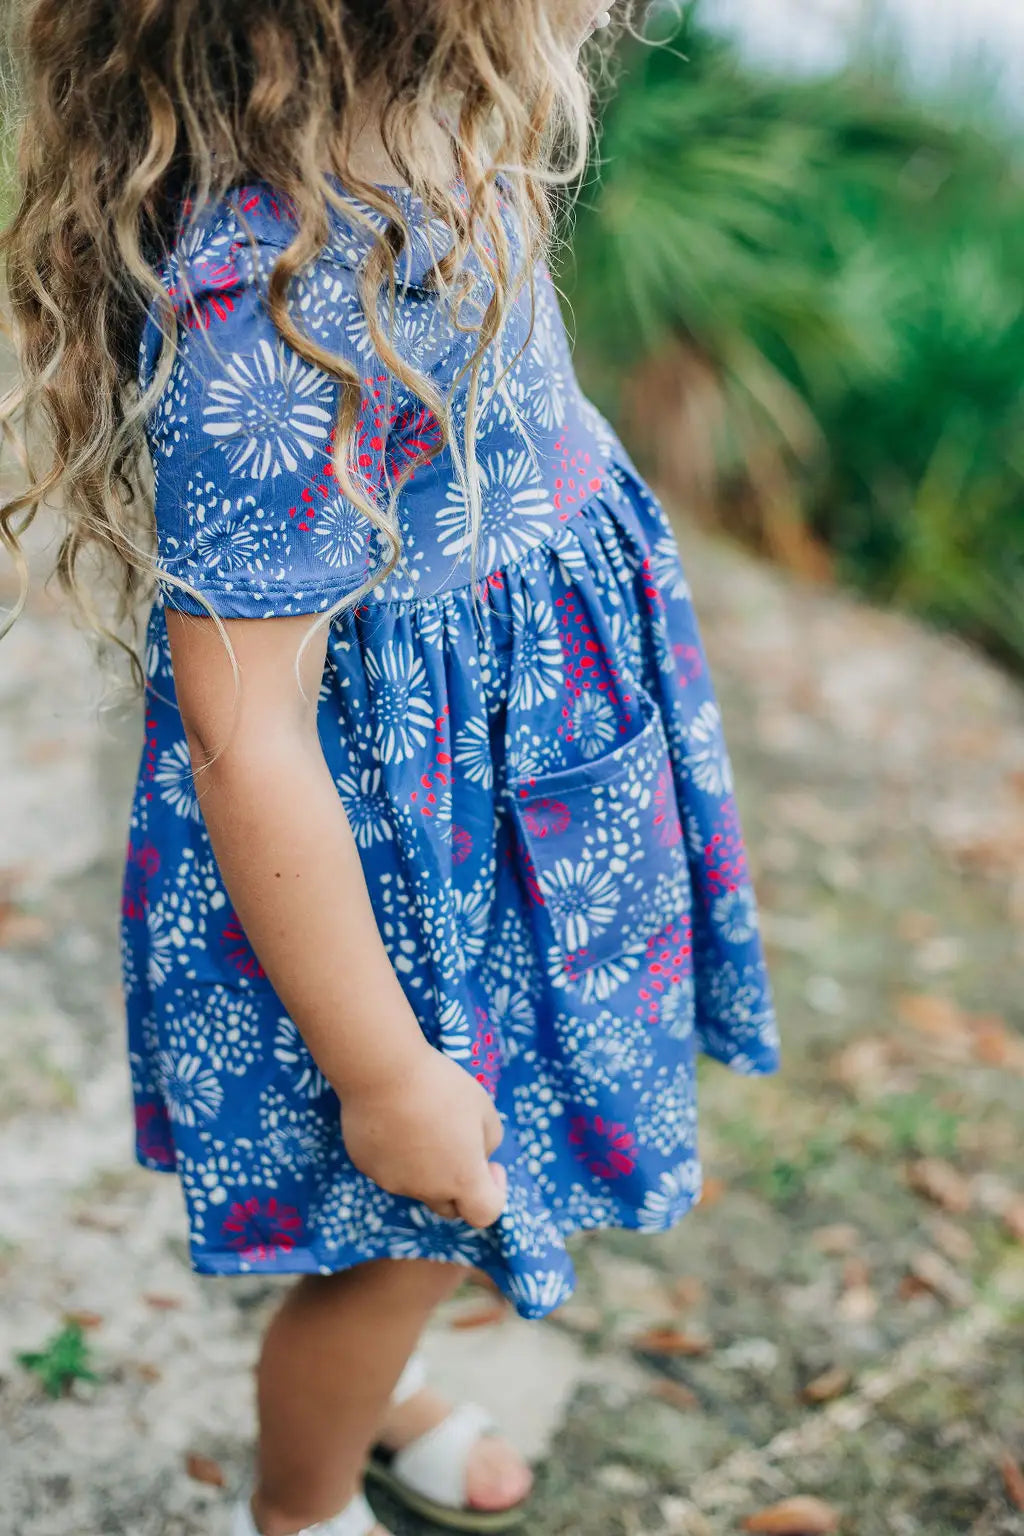 A little girl, wearing the Fireworks Twirl Dress from Sugar Bee Clothing, is standing on a dirt road.